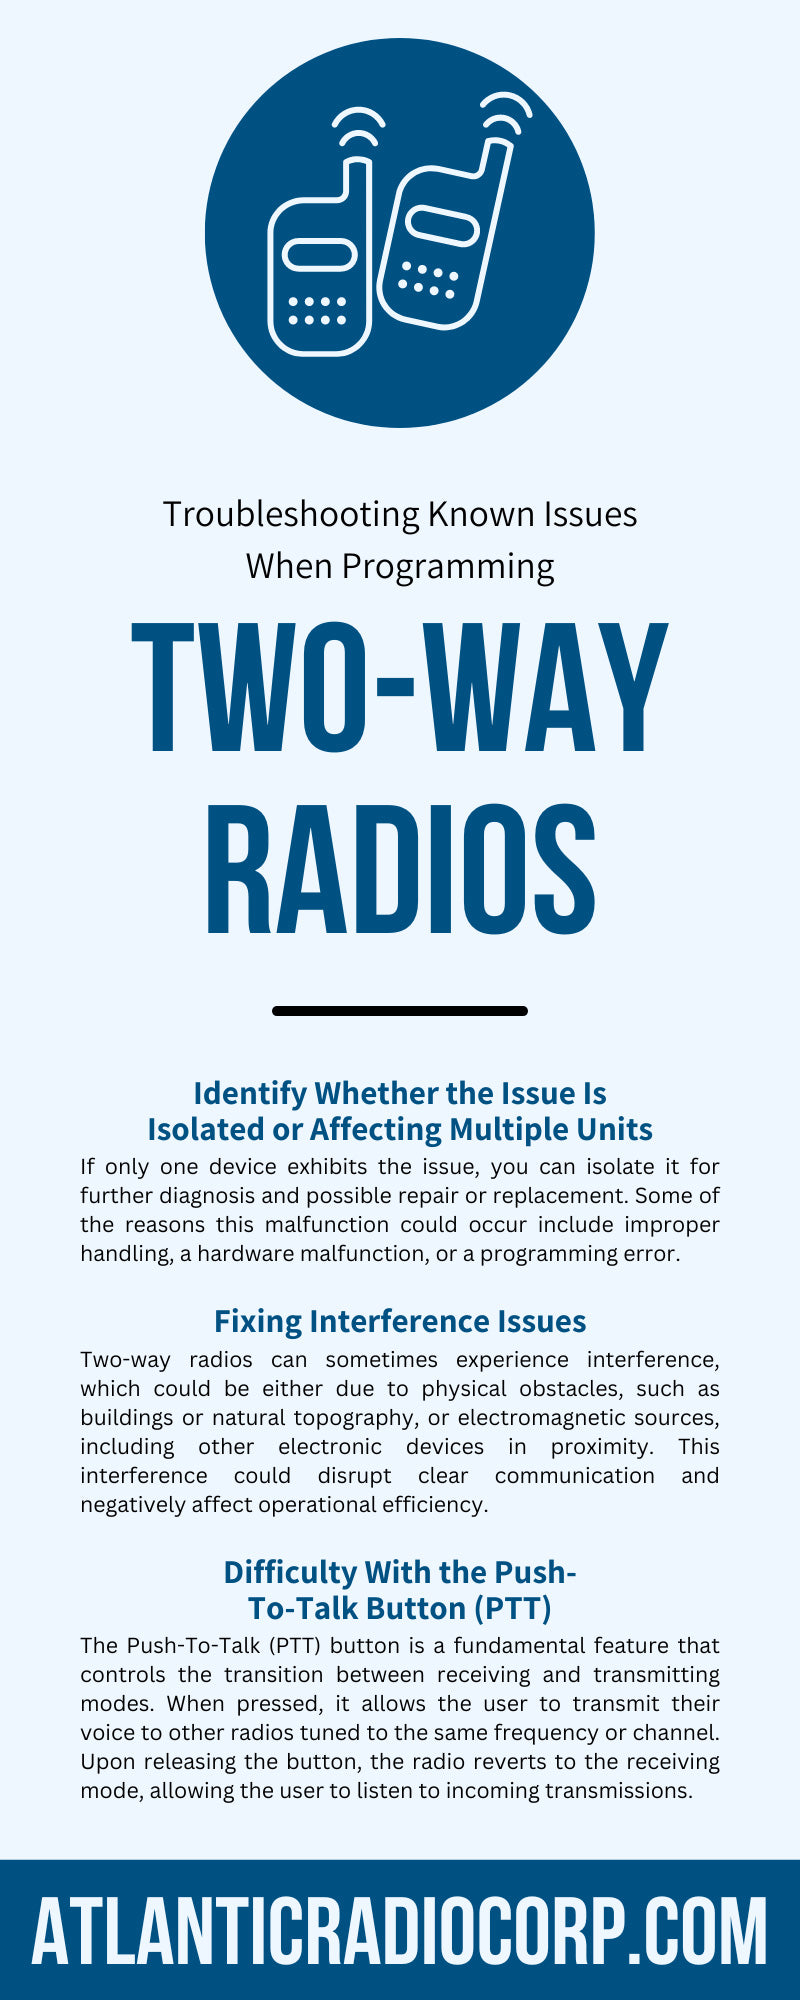 Troubleshooting Known Issues When Programming Two-Way Radios